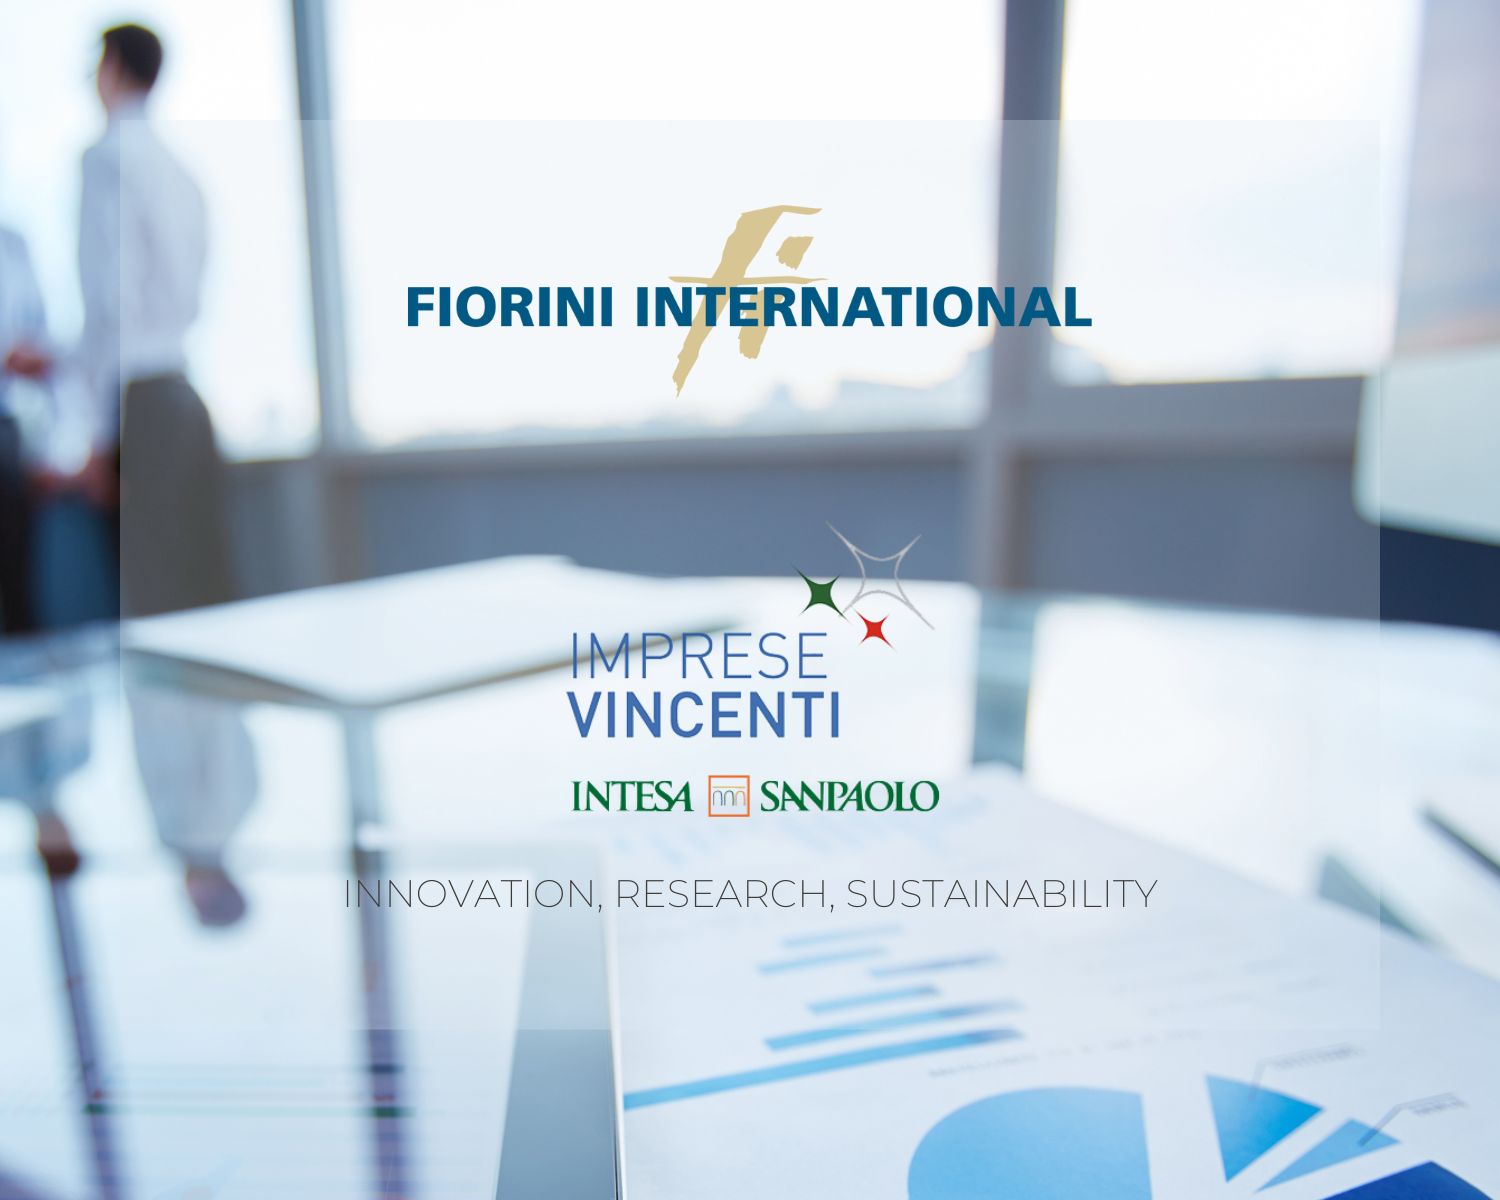 Innovation, sustainability, research, competitiveness: the key success drivers of Fiorini International, winning Imprese Vincenti 2022.